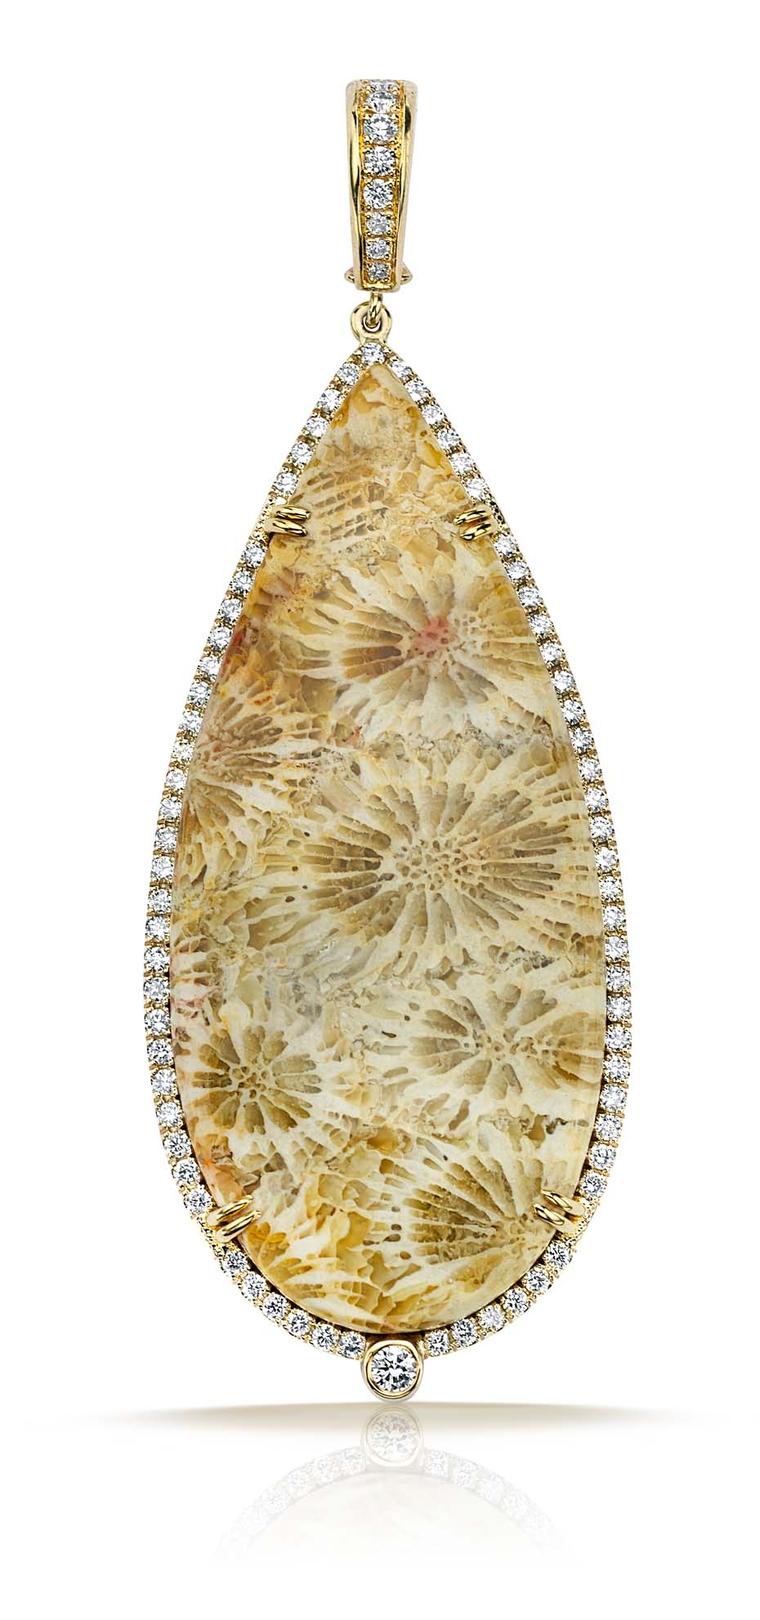 Pamela Huizenga gold pendant with 43.51ct of fossilzed coral outlined in a diamond pavé ($12,000).